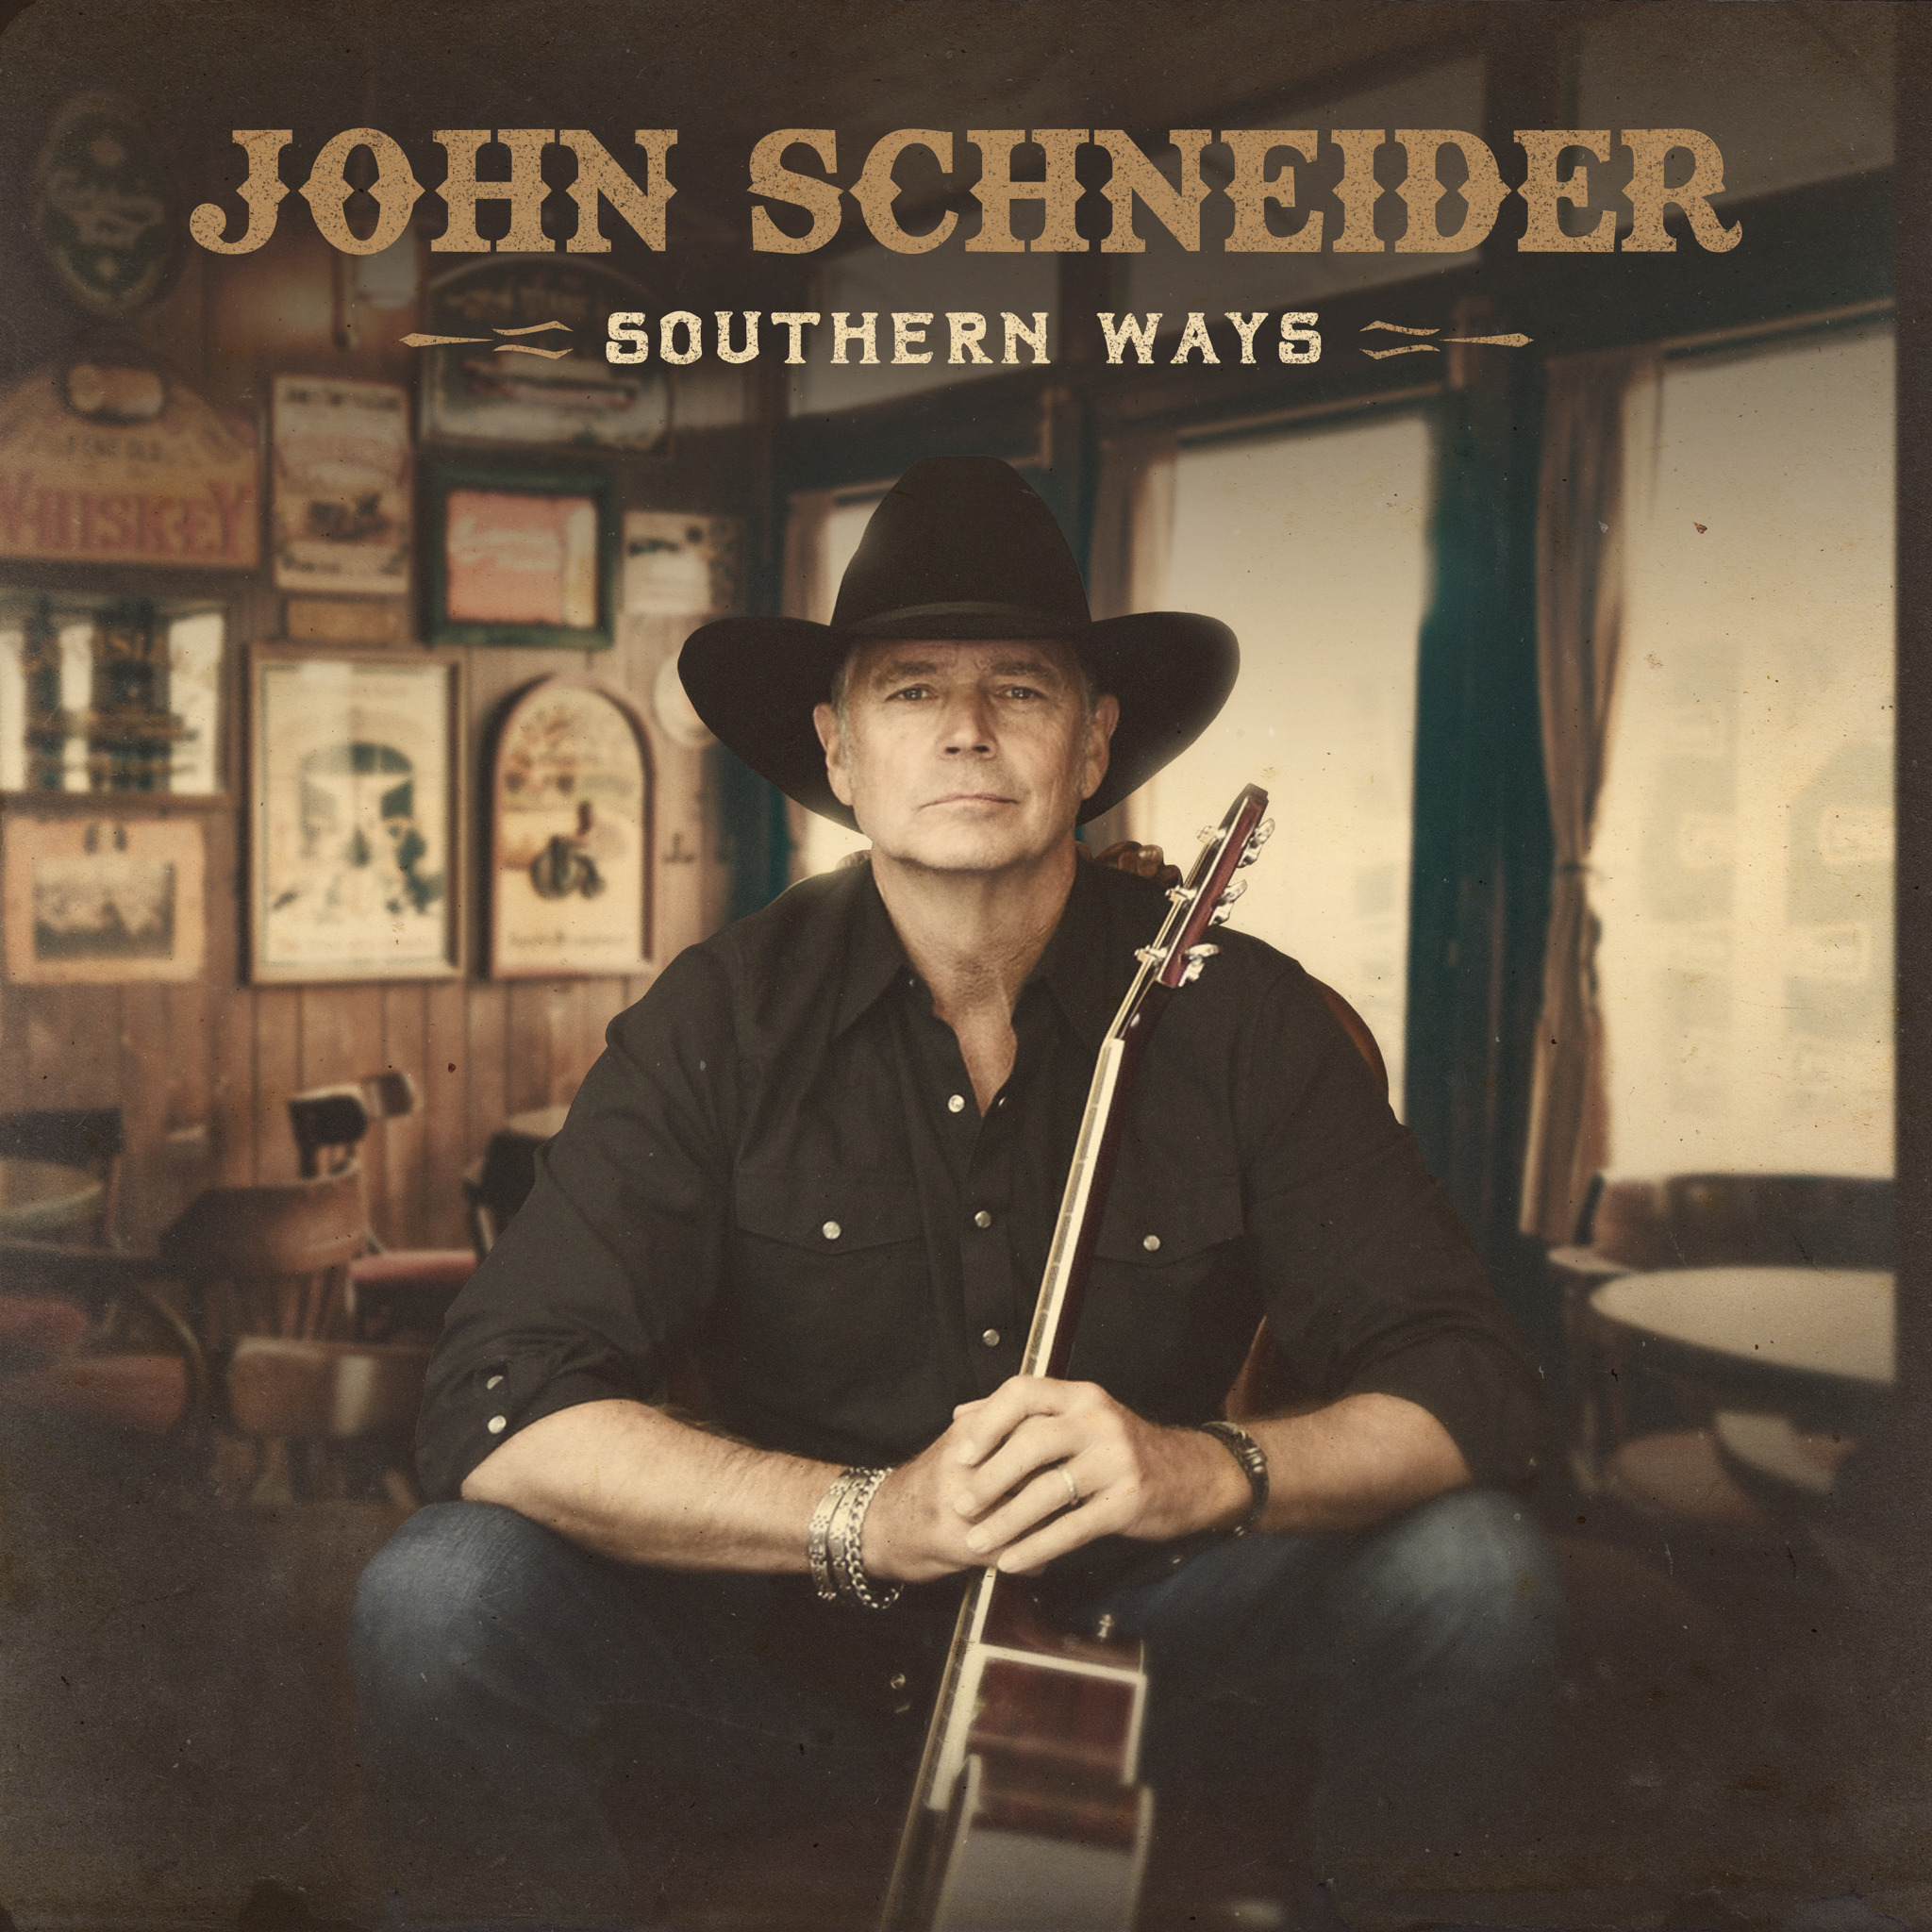 John Schneider Puts His ‘Southern Ways' on Display with New Album